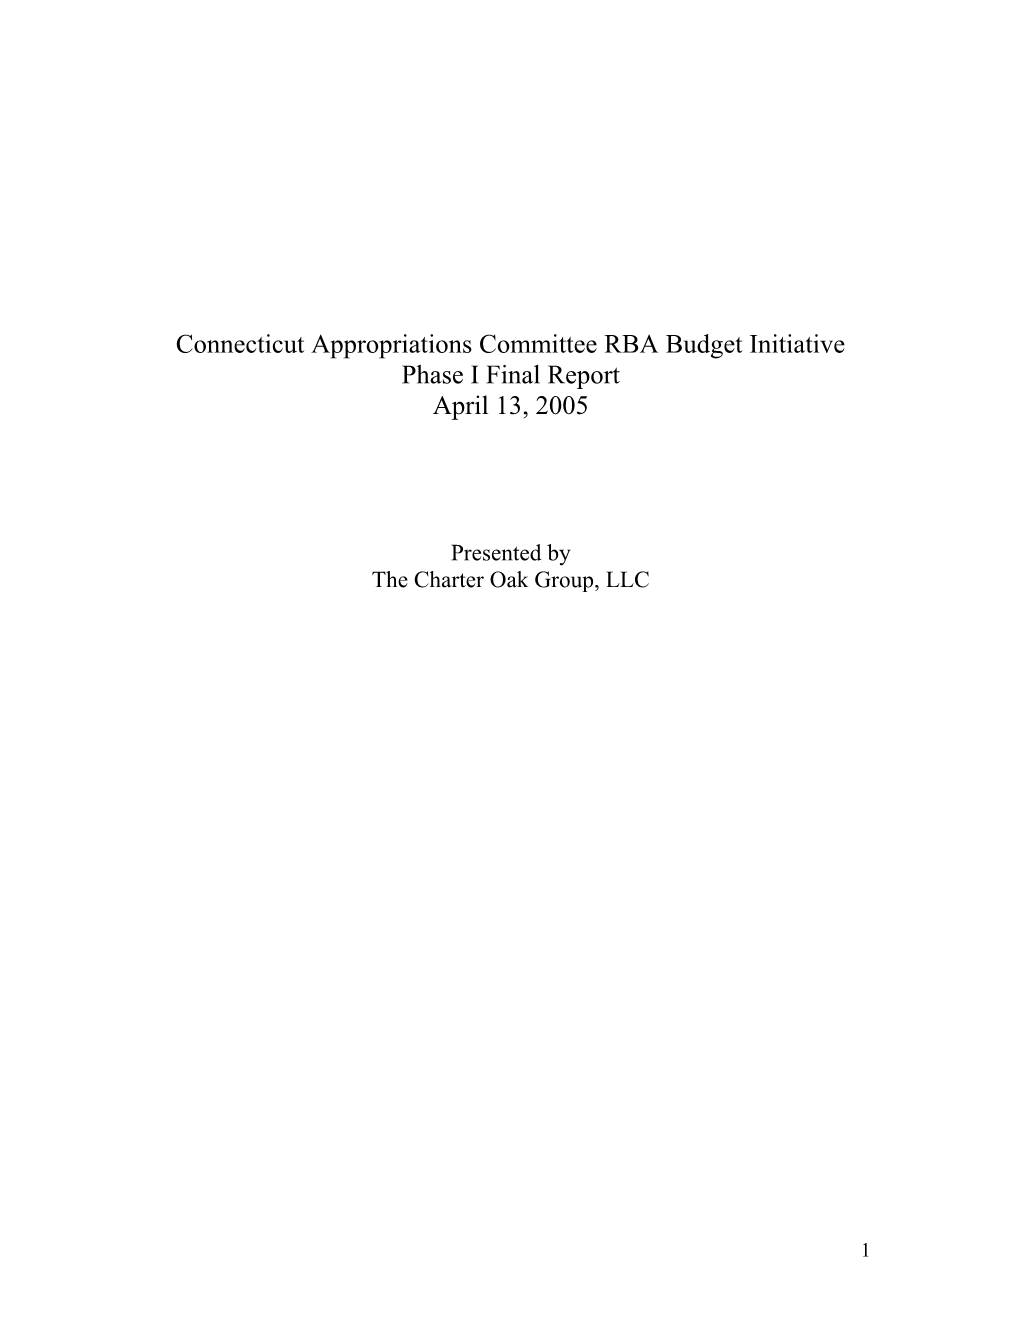 Connecticut Appropriations Committee RBA Budget Initiative